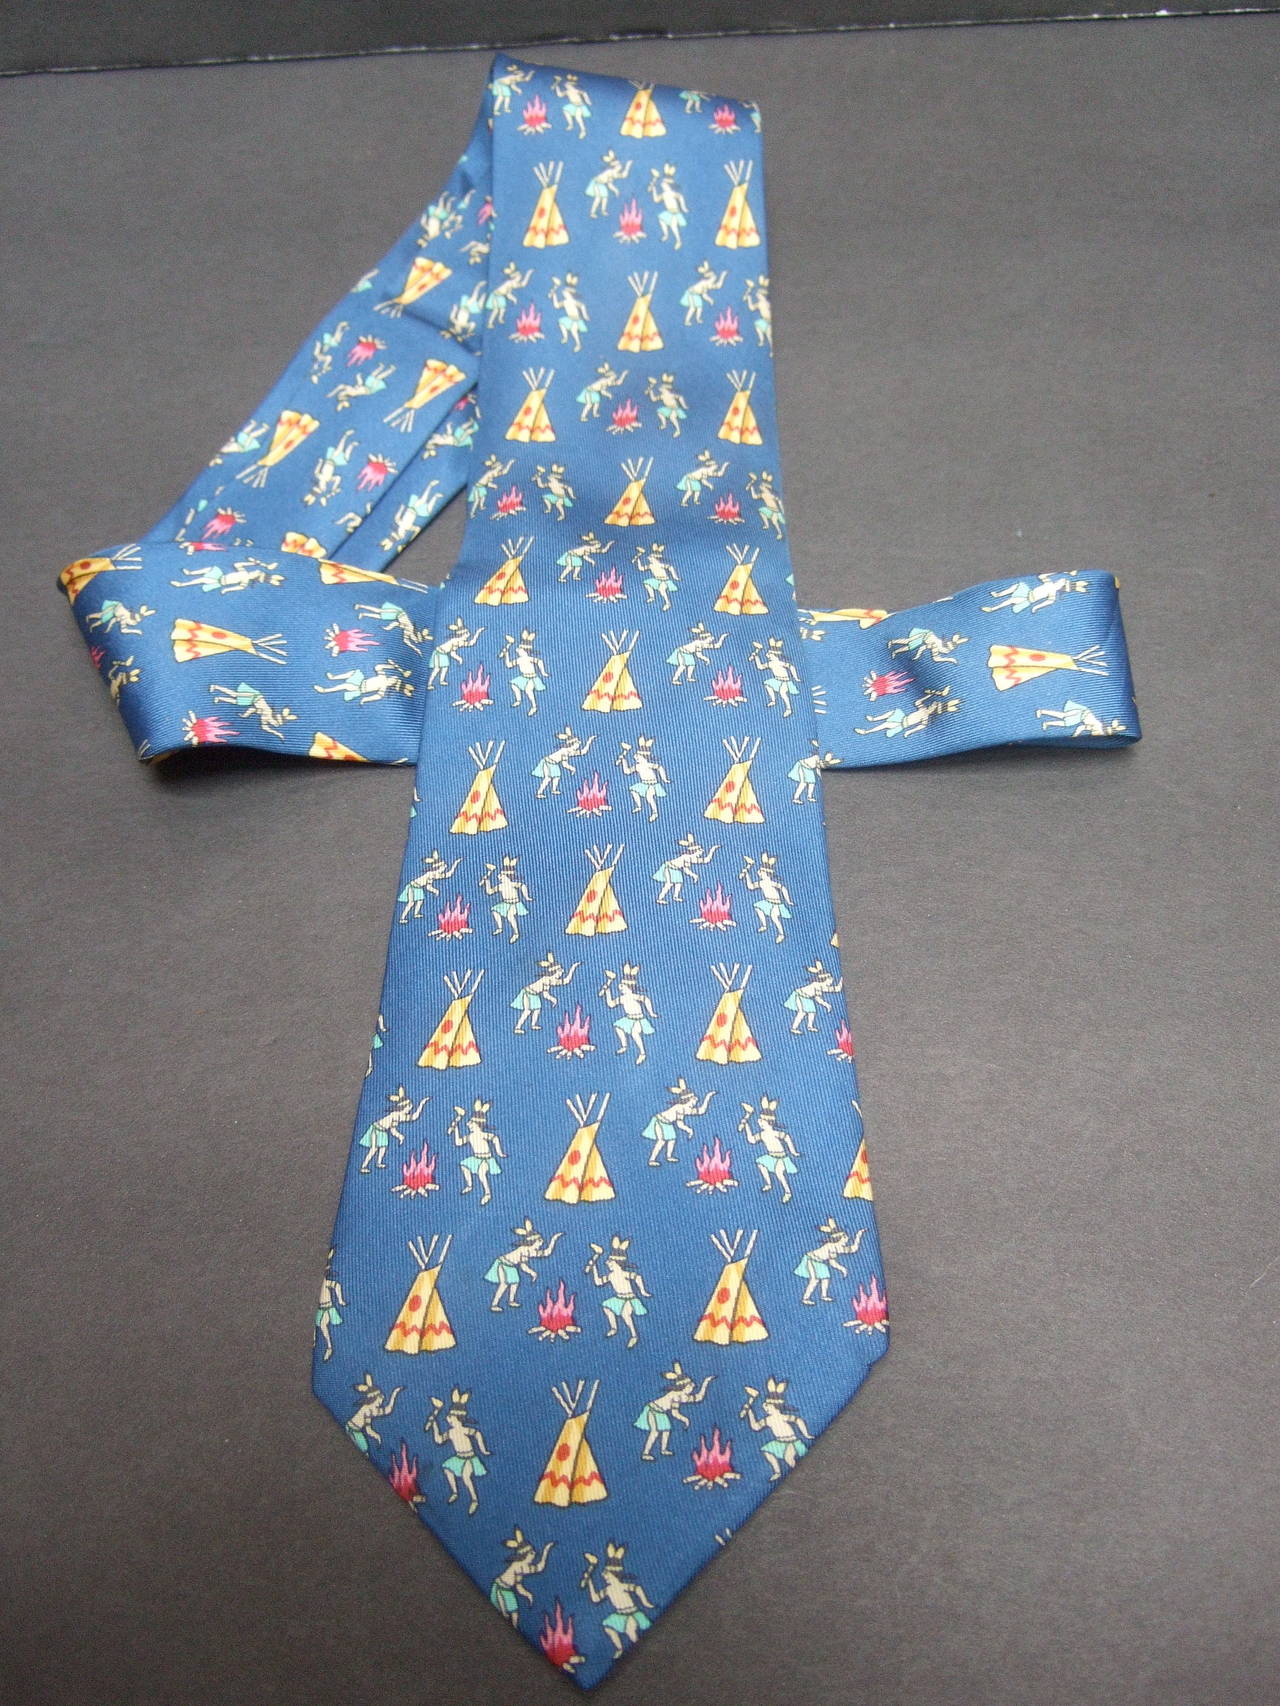 Hermes Paris Whimsical American Indian silk print necktie c 1990s
The unique designer silk necktie is illustrated with pairs 
of warriors dancing around a burning fire. The cobalt blue
background is designed with teepee huts

Labeled Hermes